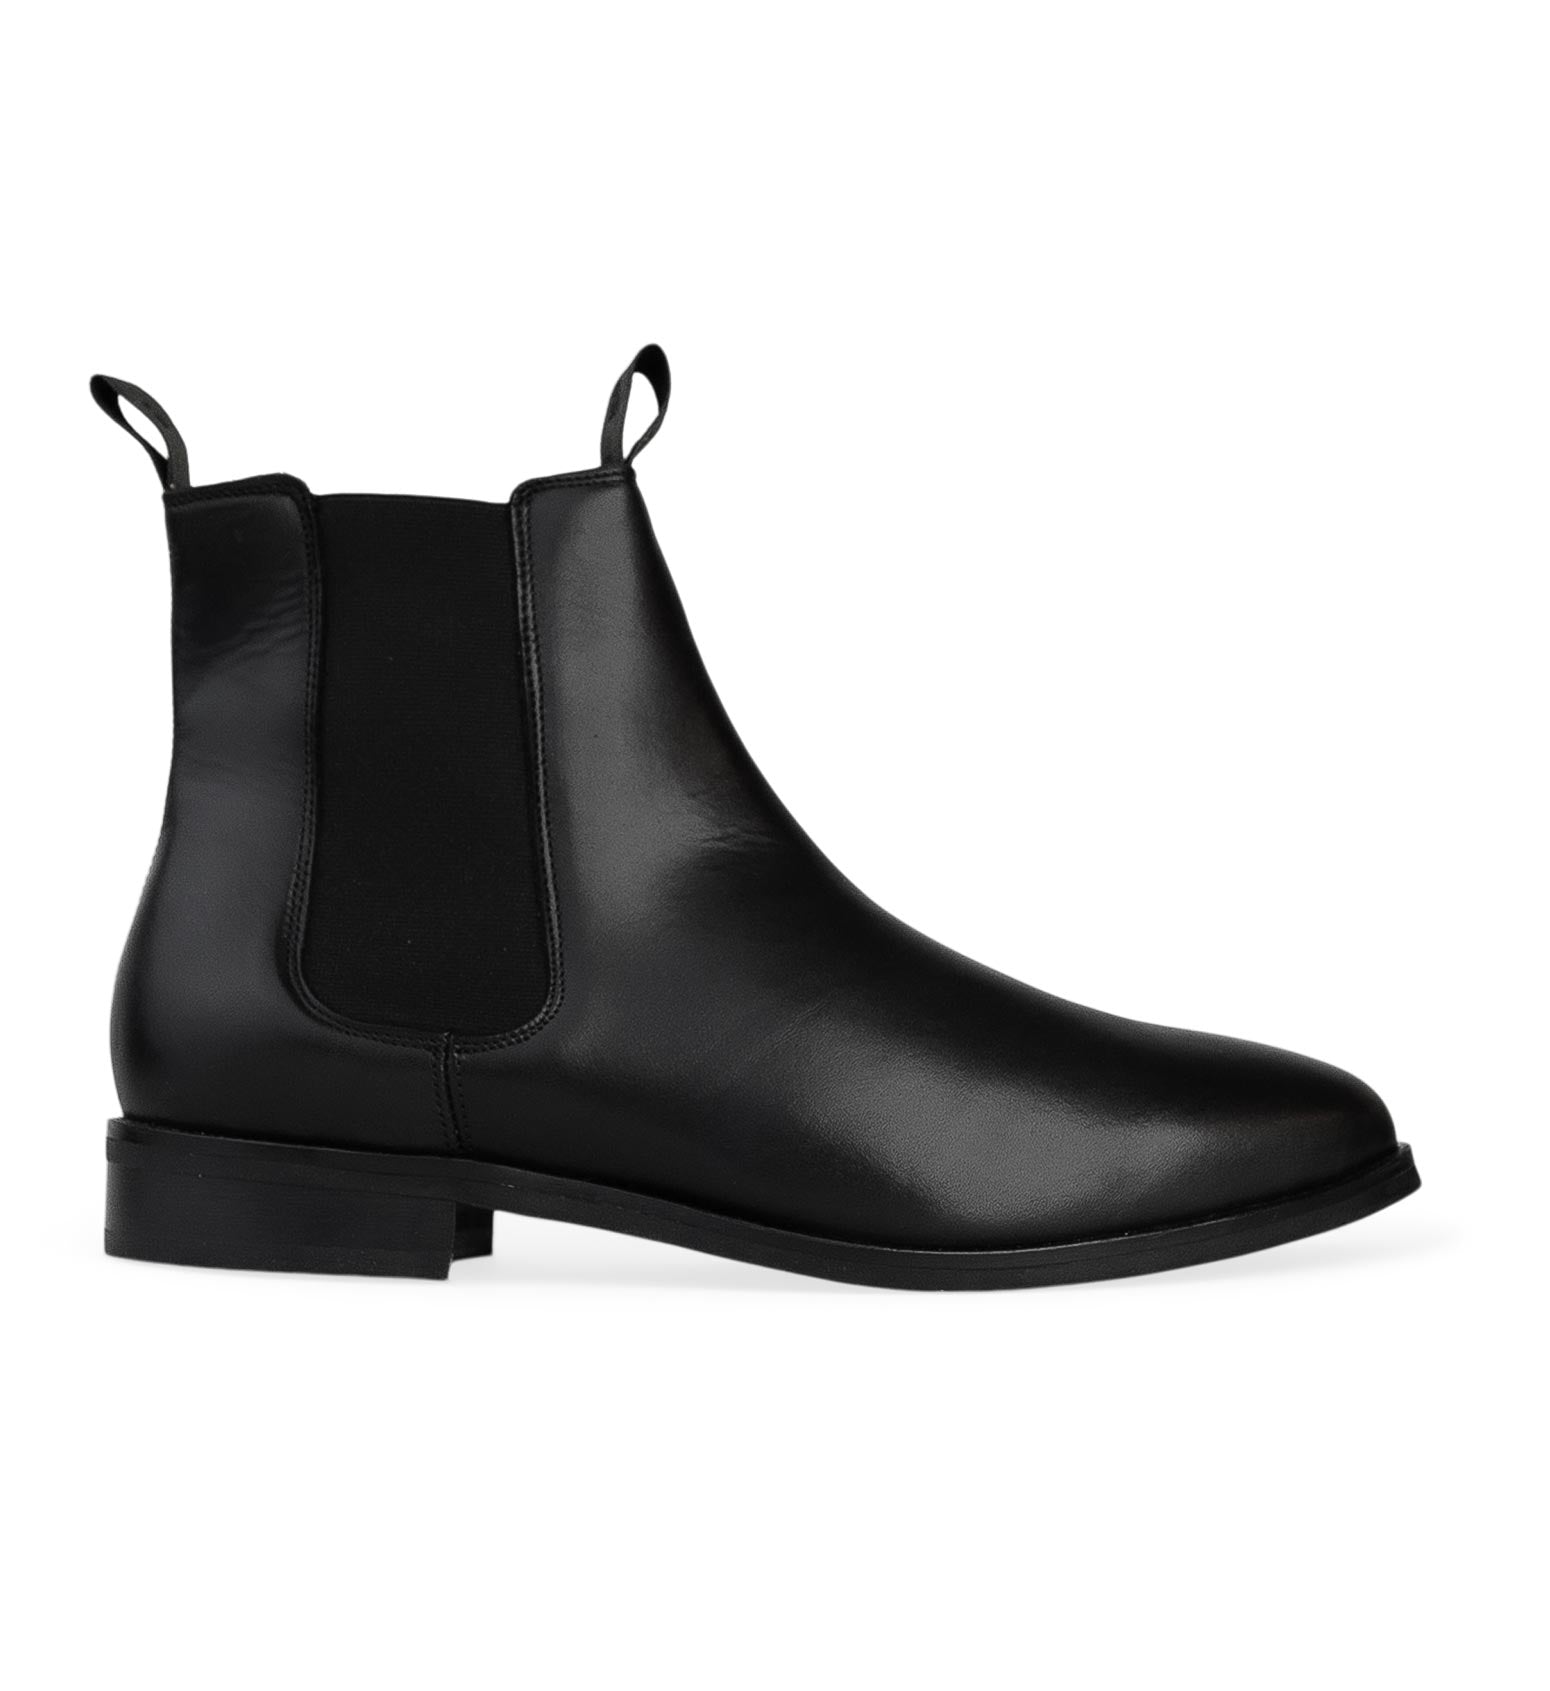 Thallium Rubber Sole Black Leather Boots | Bared Footwear